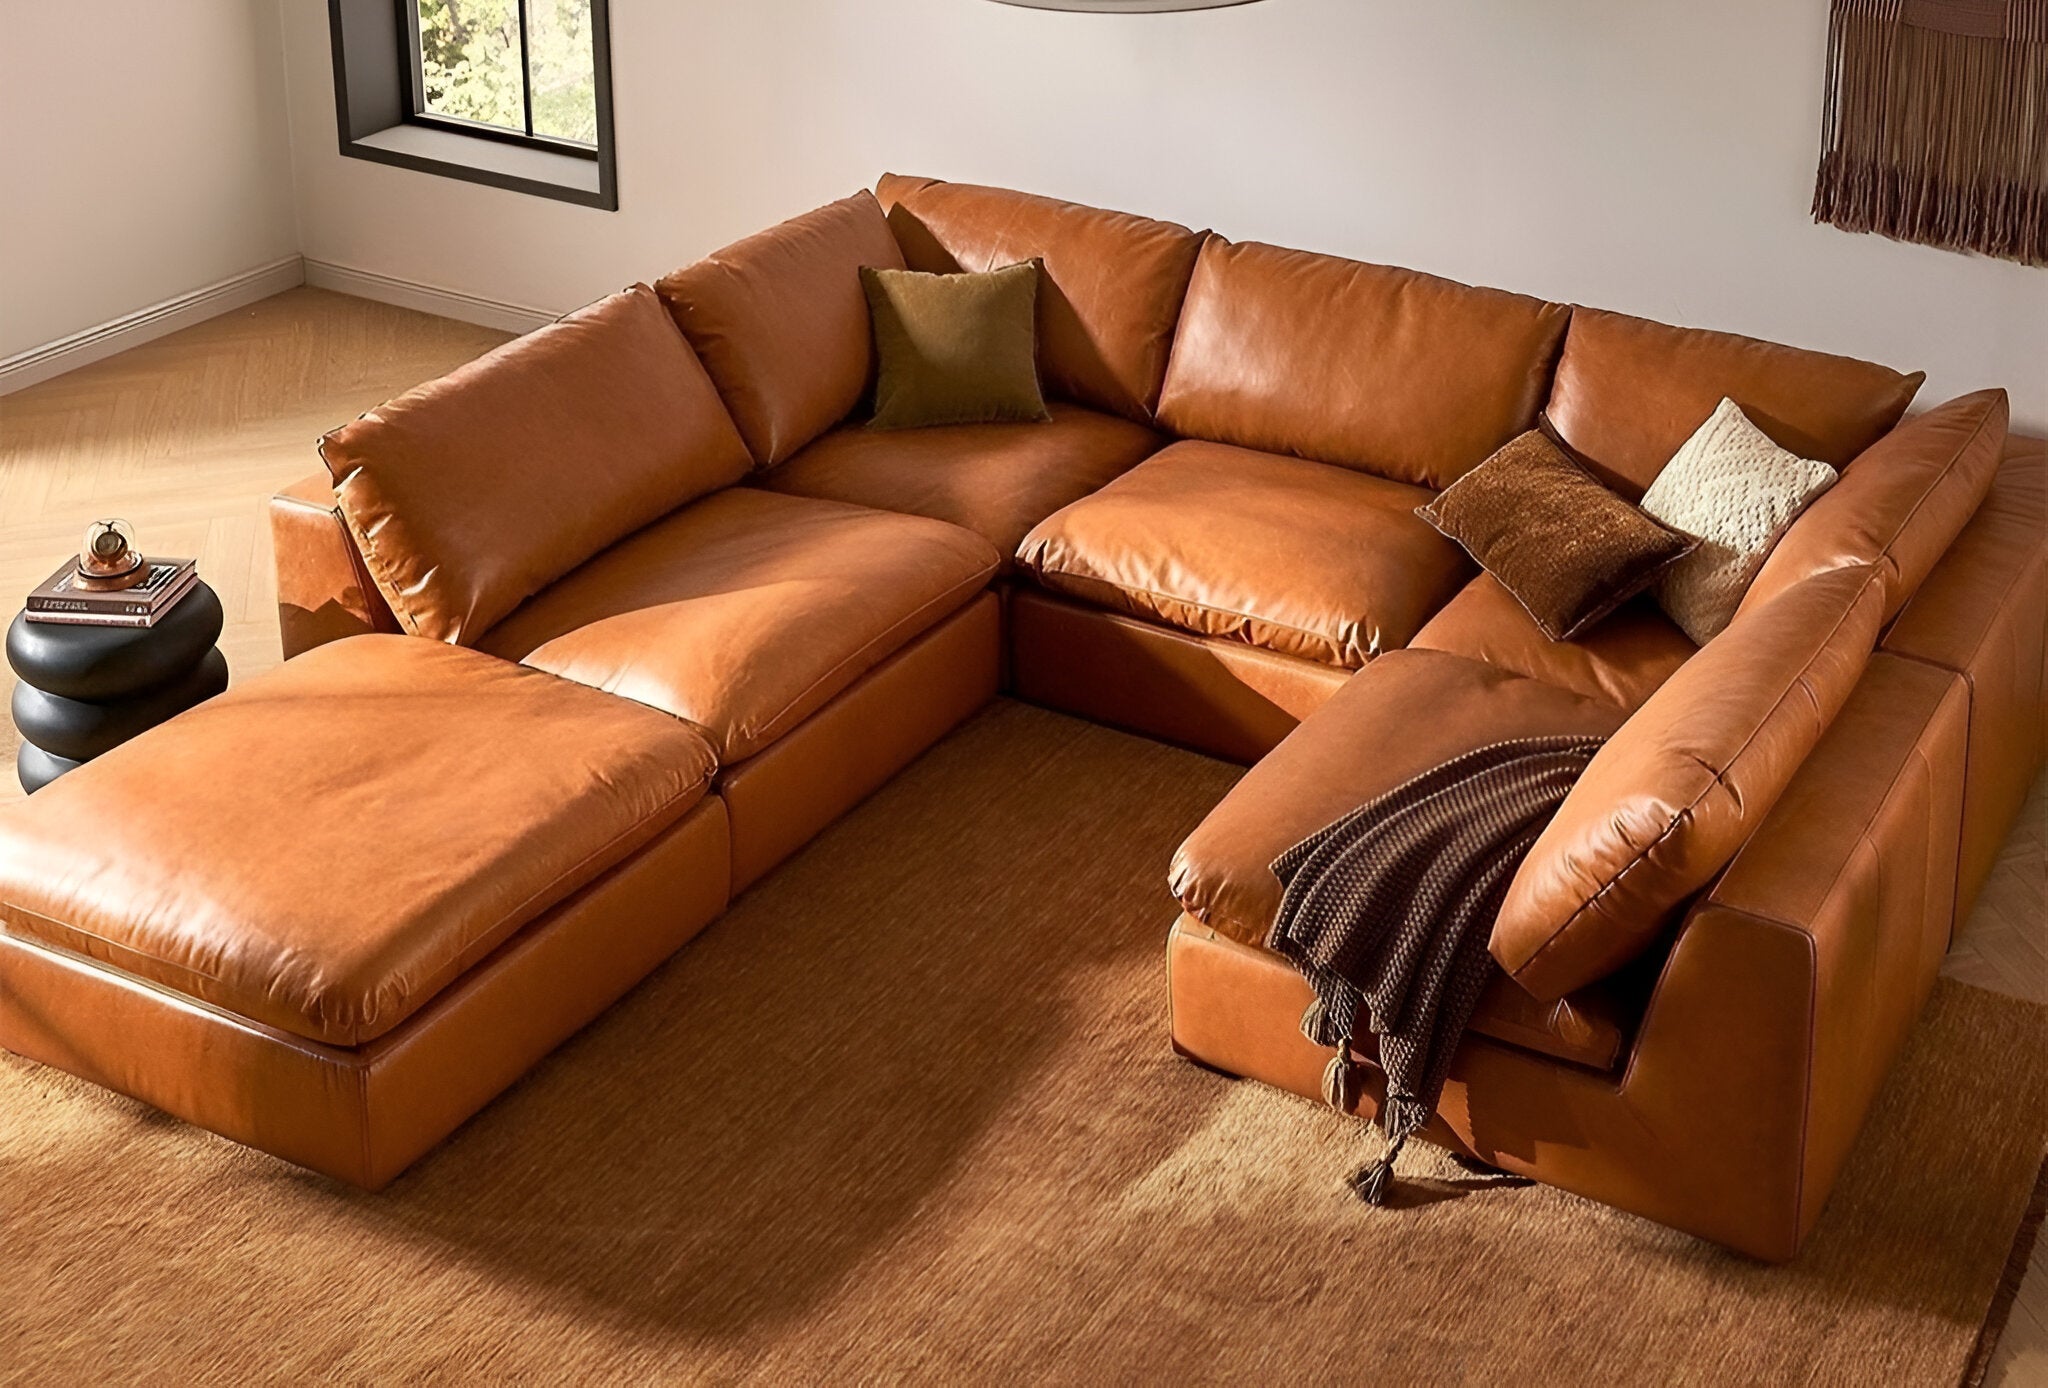 L-Shape View of Majento 5-Seater L-Shape Sofa, stylish and spacious, perfect for large living rooms and family gatherings.